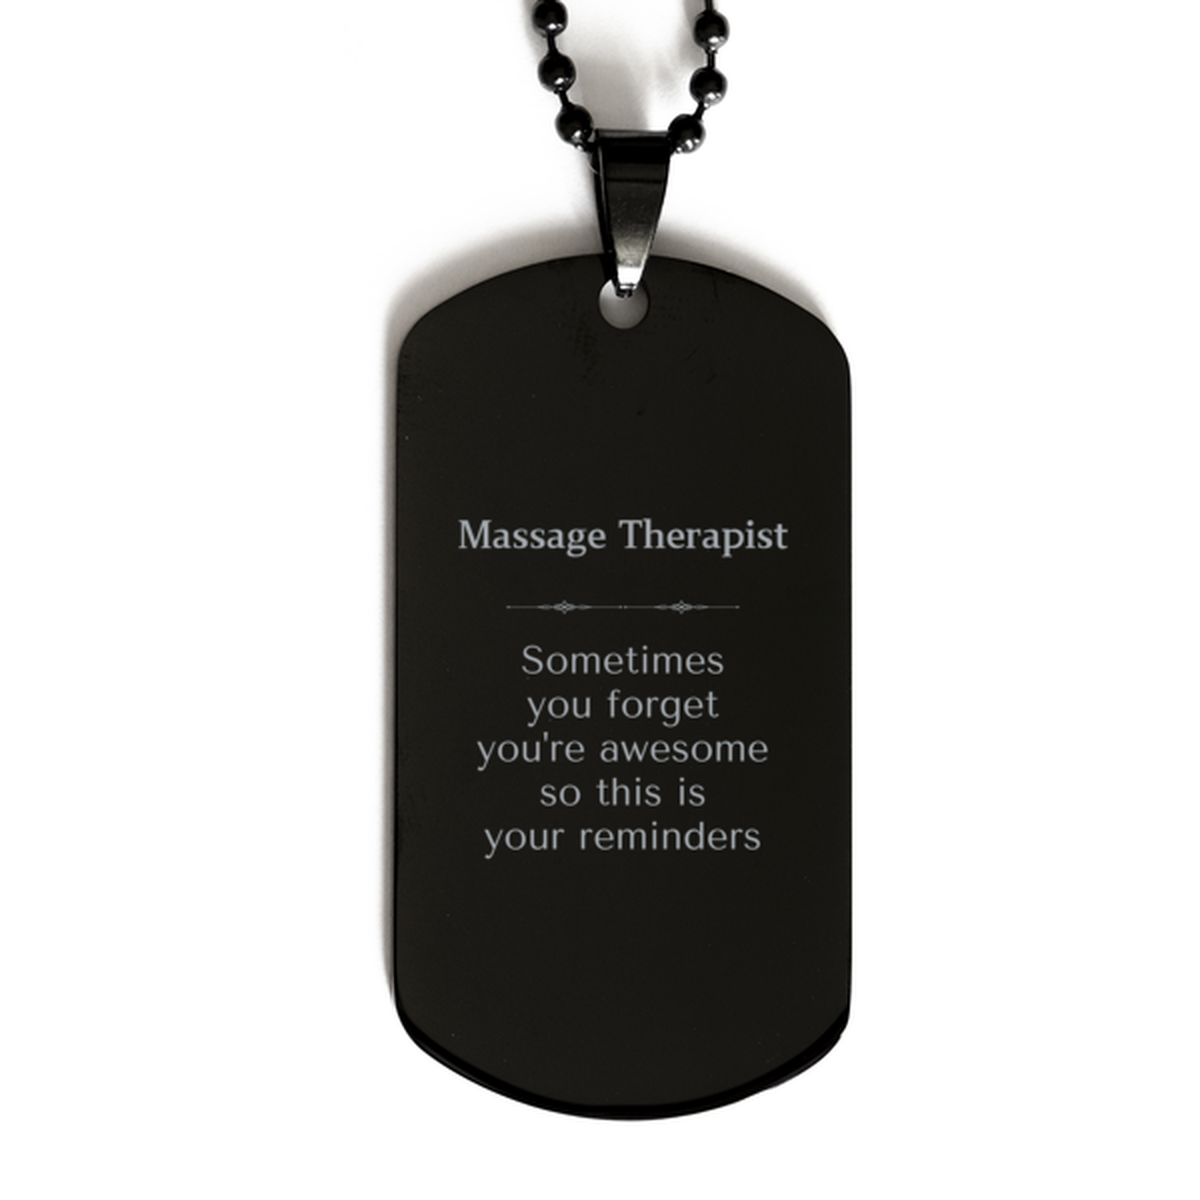 Sentimental Massage Therapist Black Dog Tag, Massage Therapist Sometimes you forget you're awesome so this is your reminders, Graduation Christmas Birthday Gifts for Massage Therapist, Men, Women, Coworkers